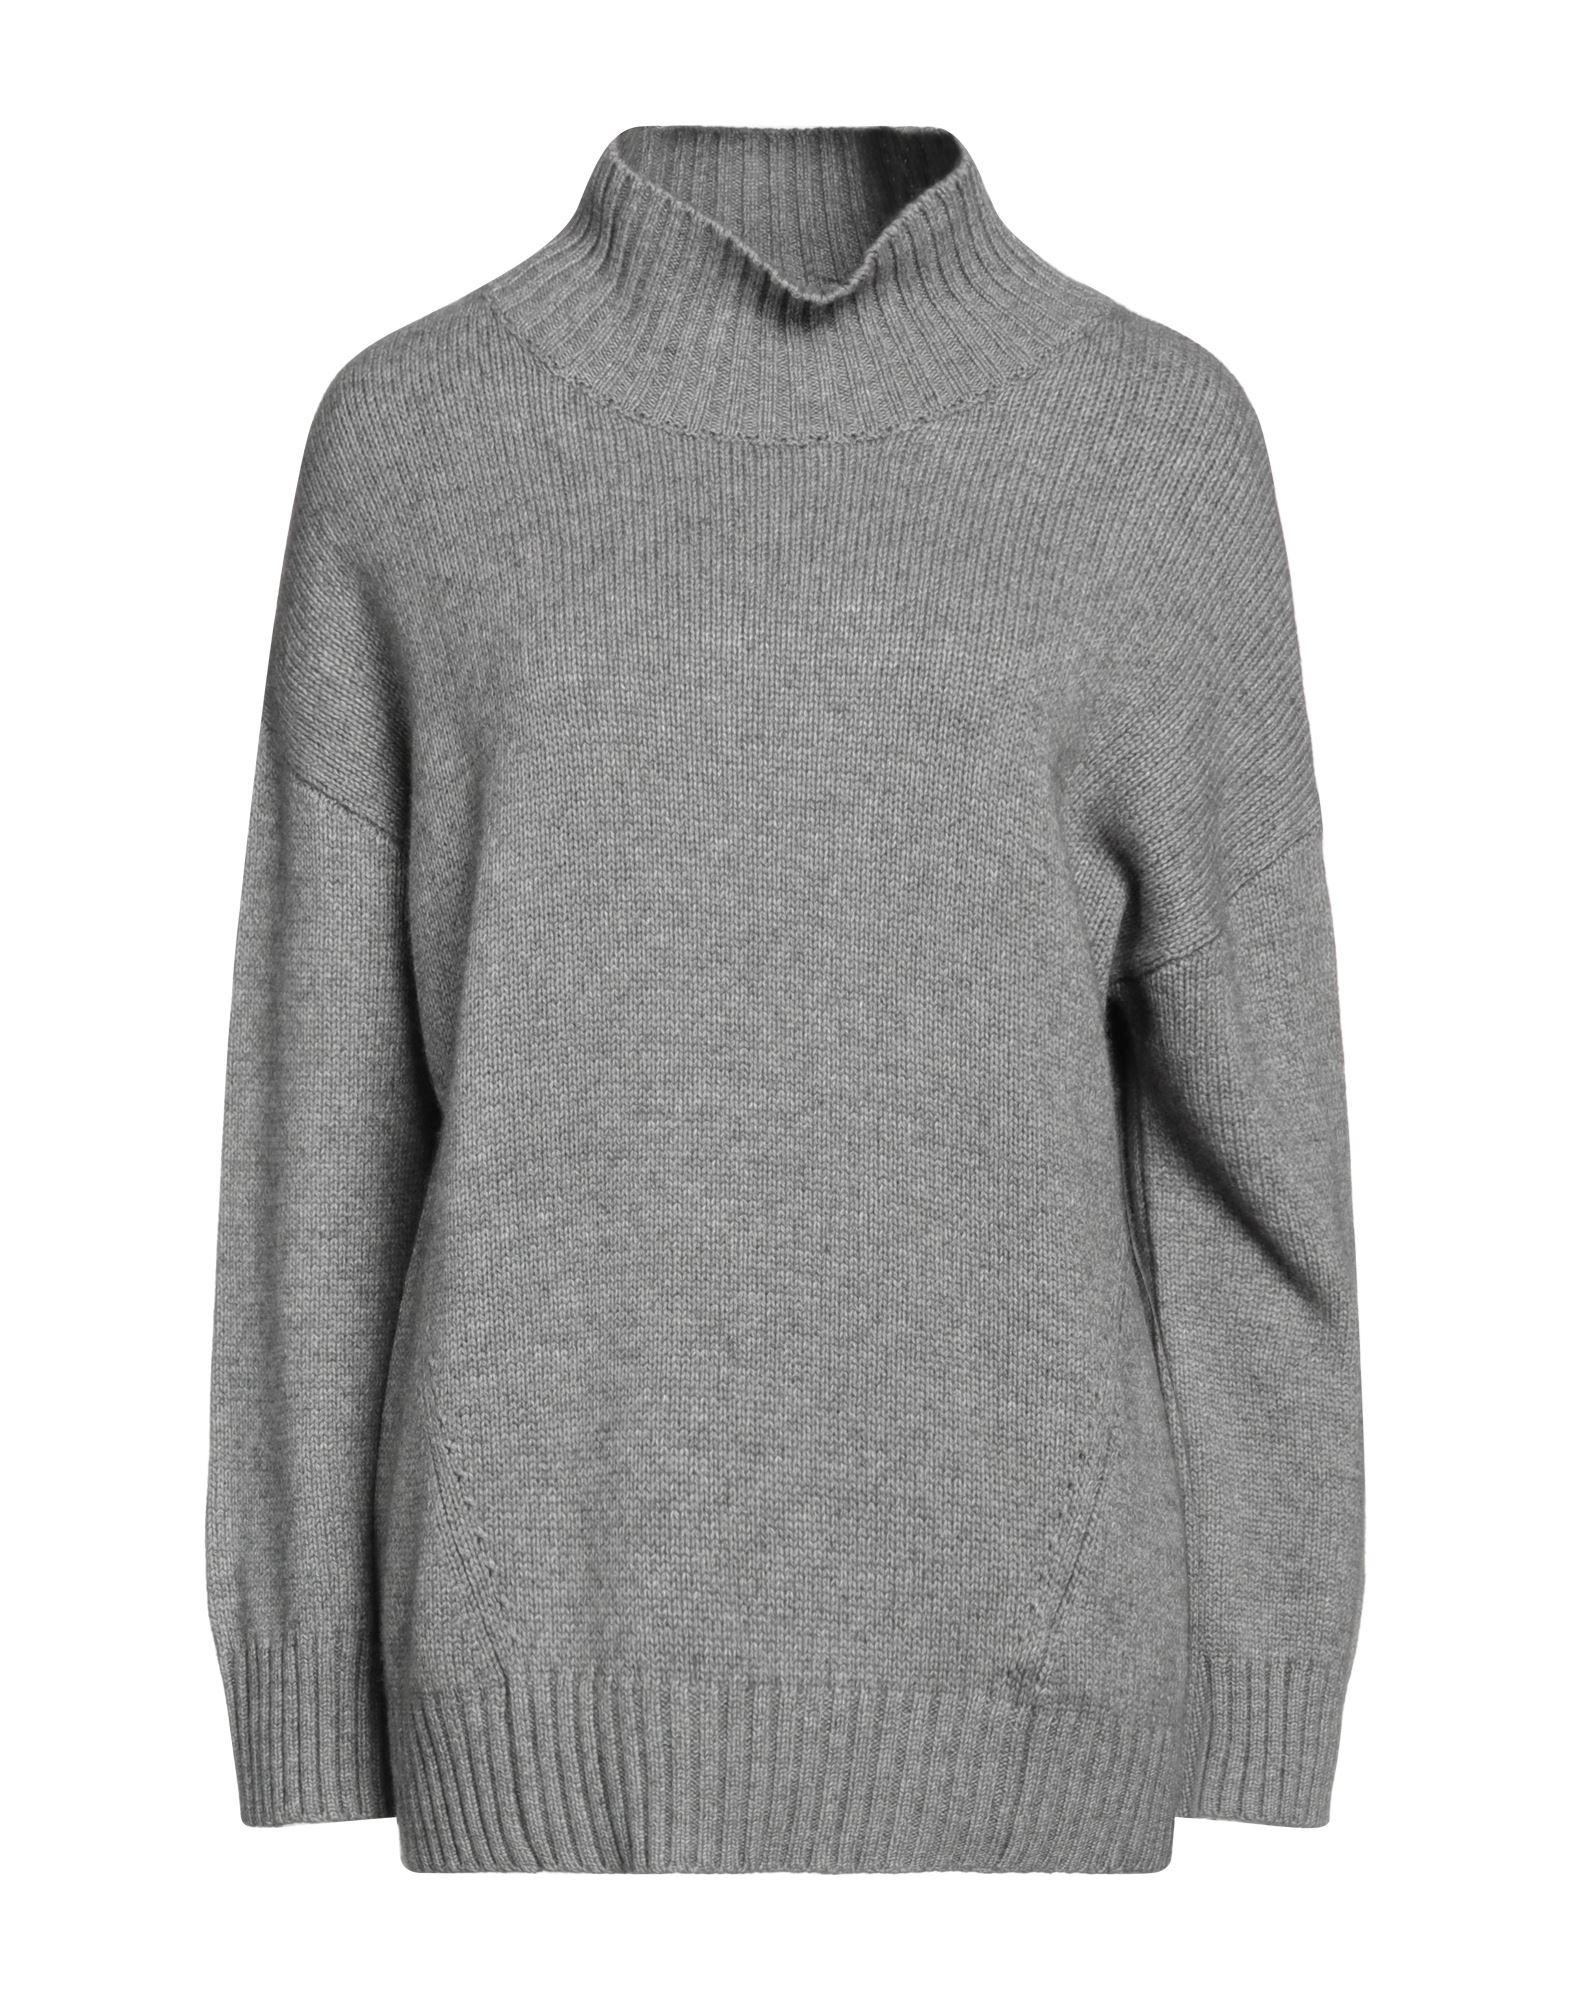 N.O.W. ANDREA ROSATI CASHMERE Synthetic Turtleneck in Grey (Gray) | Lyst